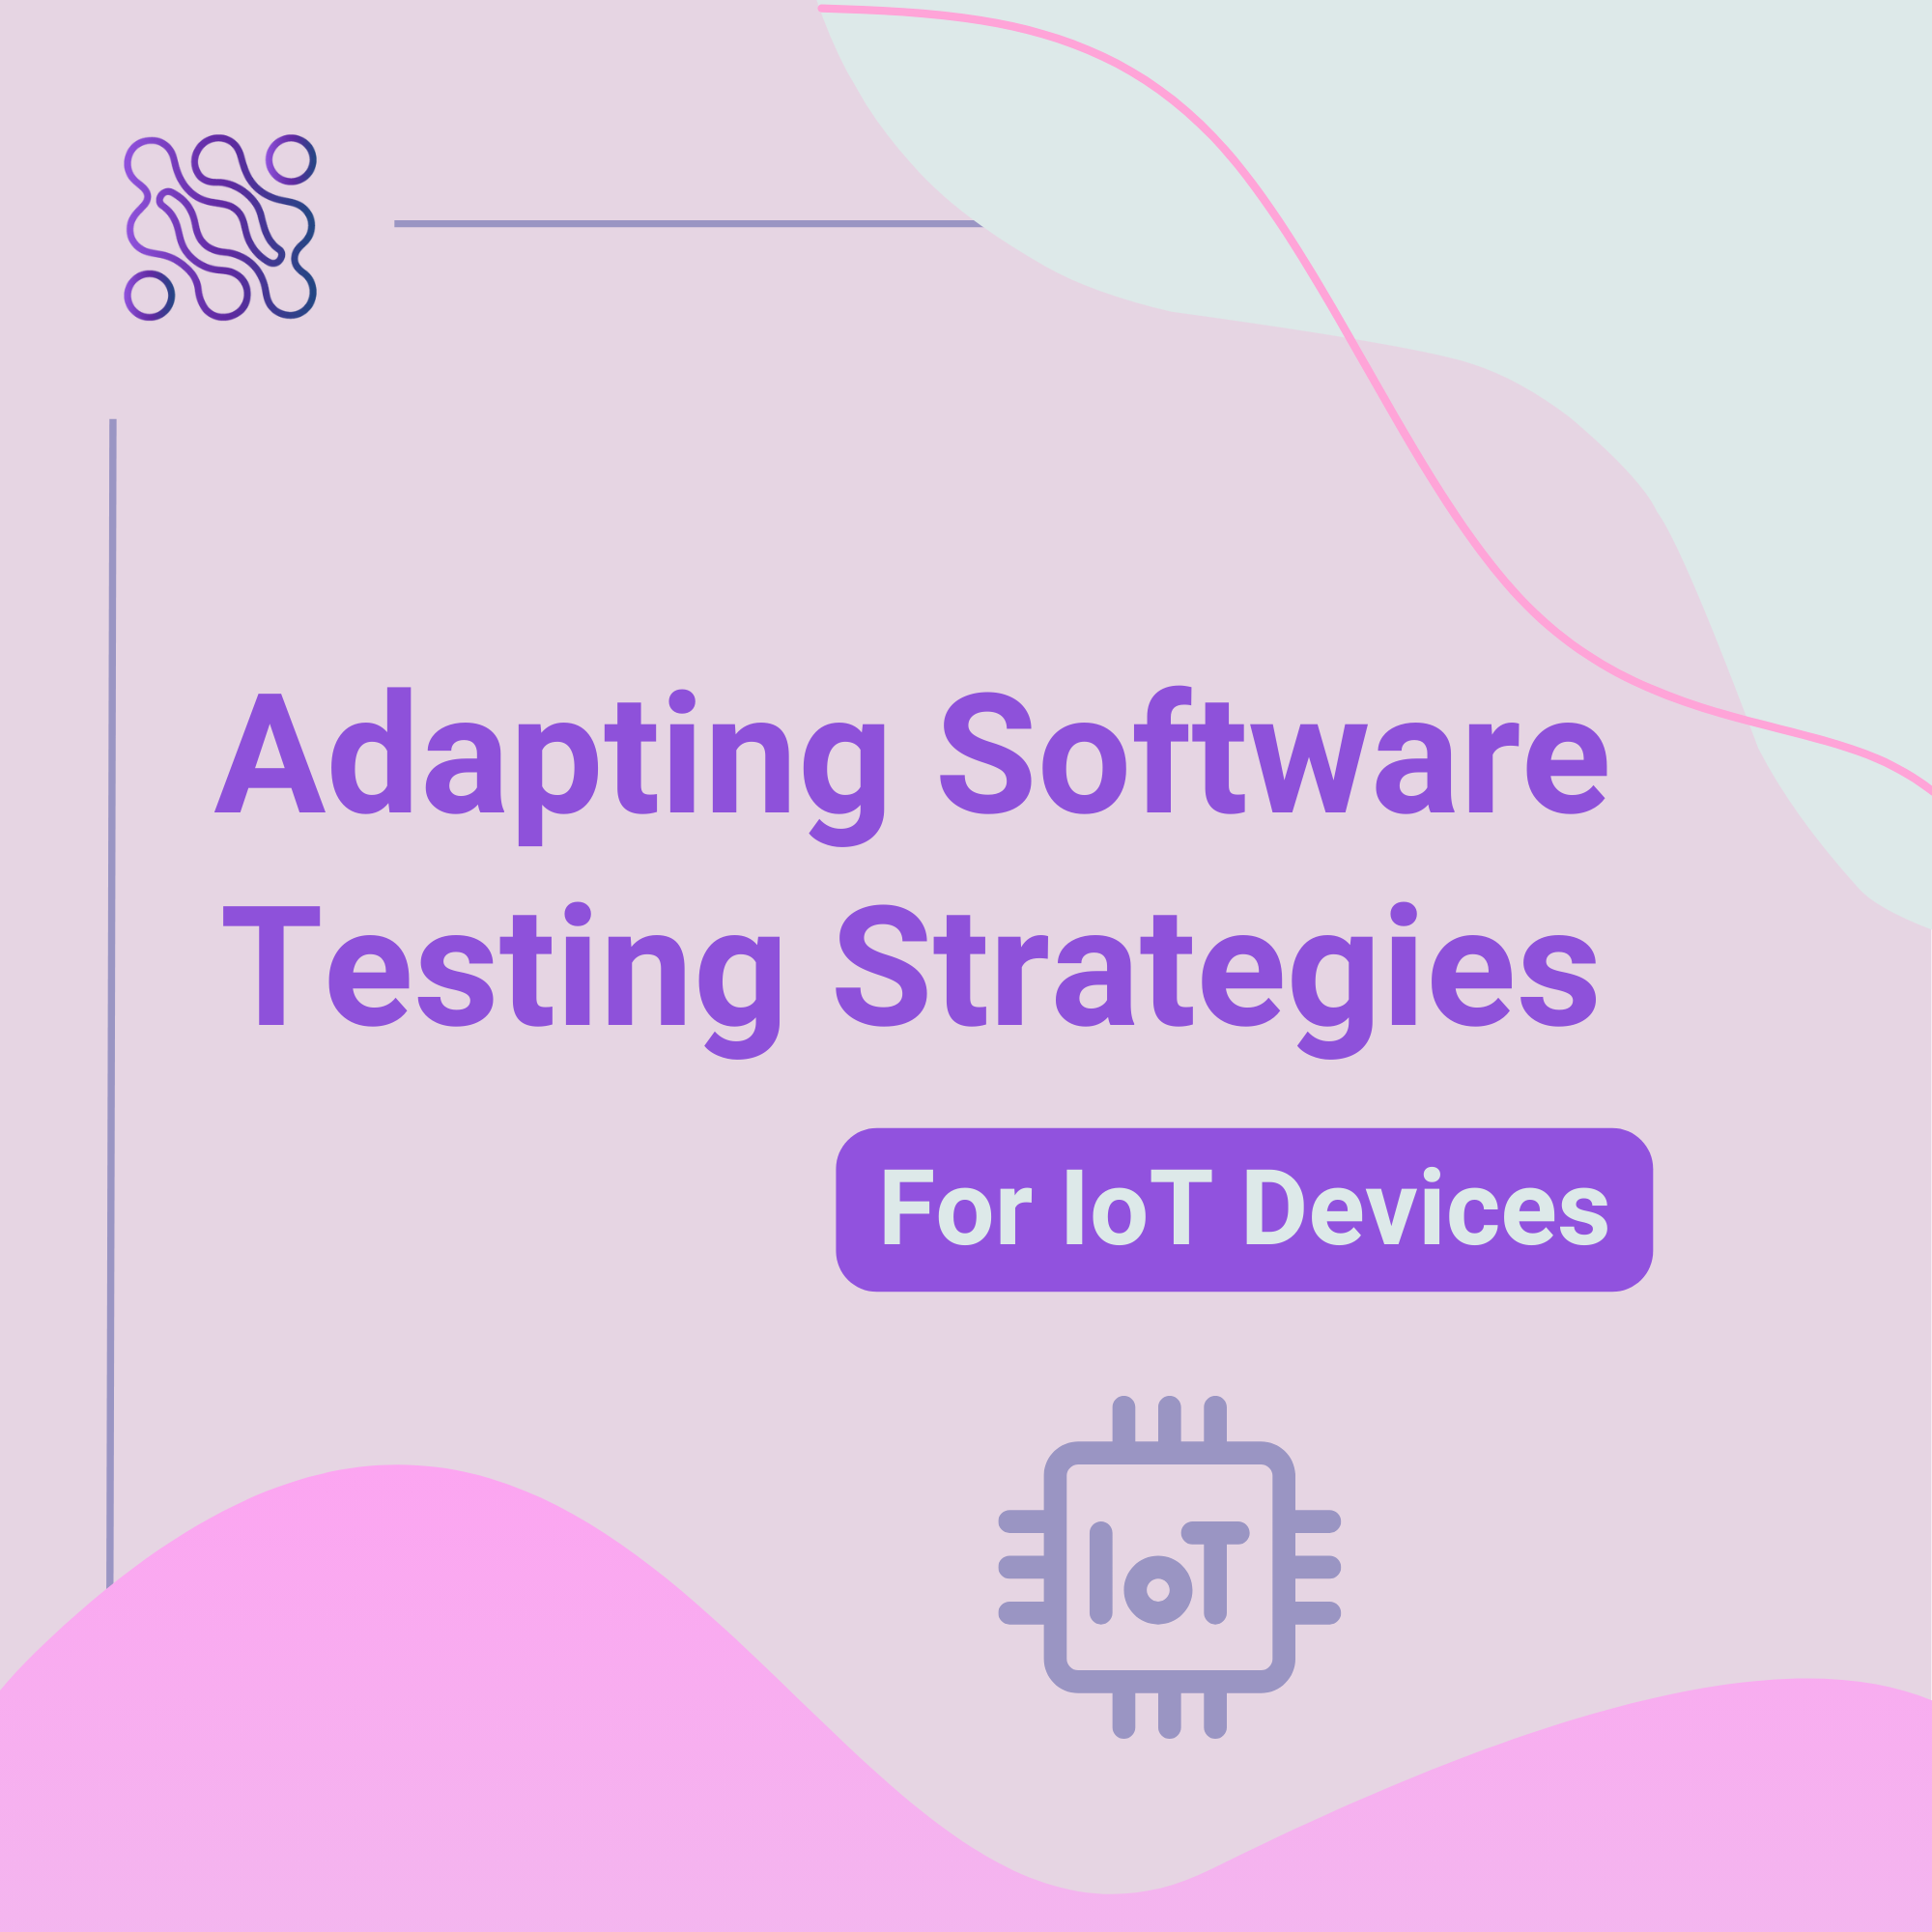 Adapting Software Testing Strategies for IoT Devices